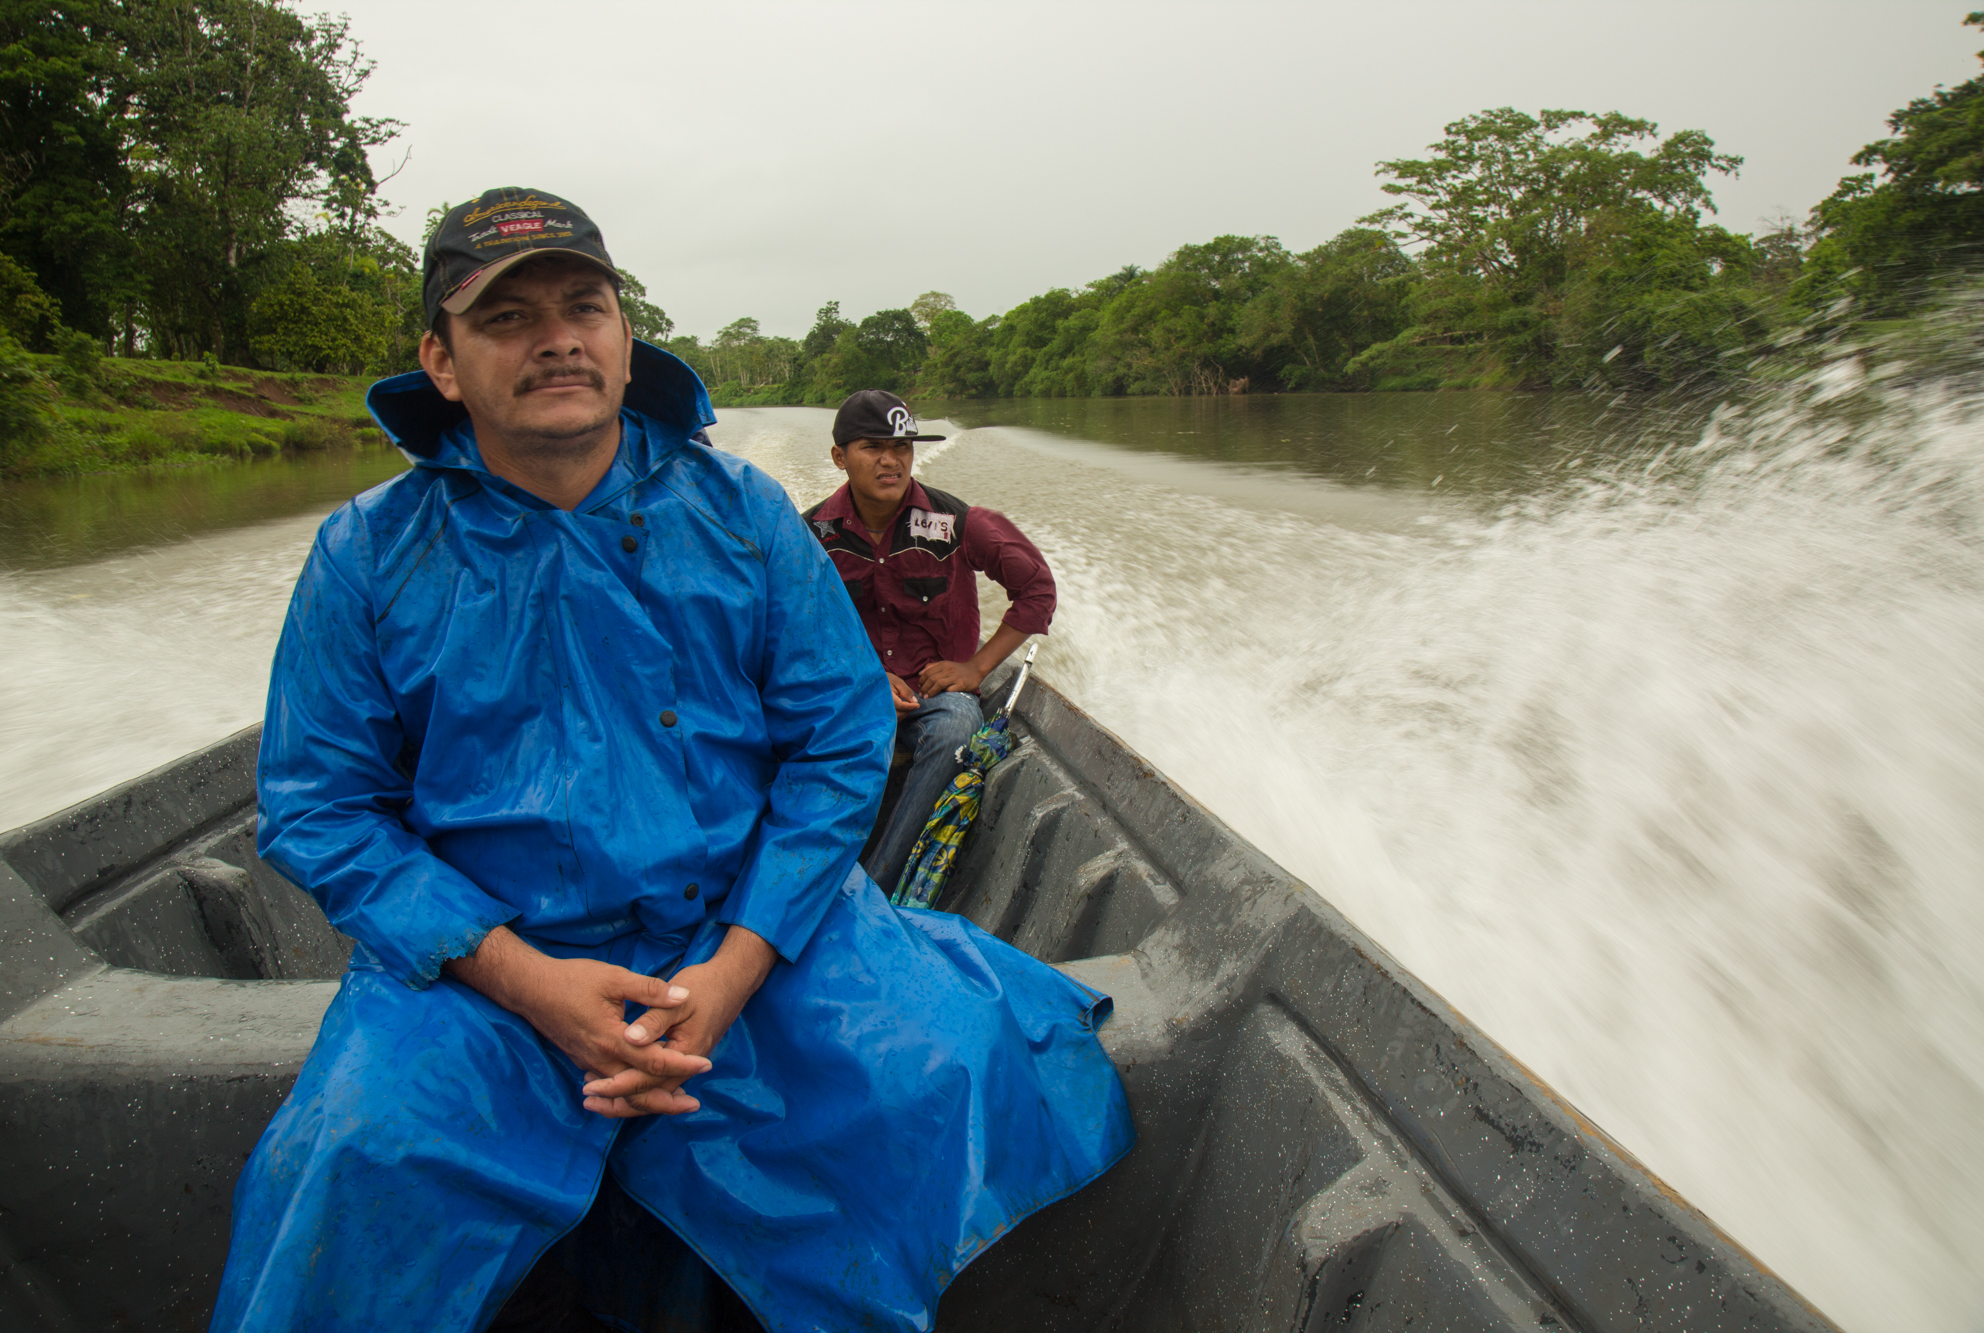  Medardo Mairena of Punta Gorda, RAAS, Nicaragua, leader of the Consejo Nacional anti canal movement visits communities along the banks of the Punta Gorda river. If the Gran Canal project were to go forward, the river would be dredged as a shipping l